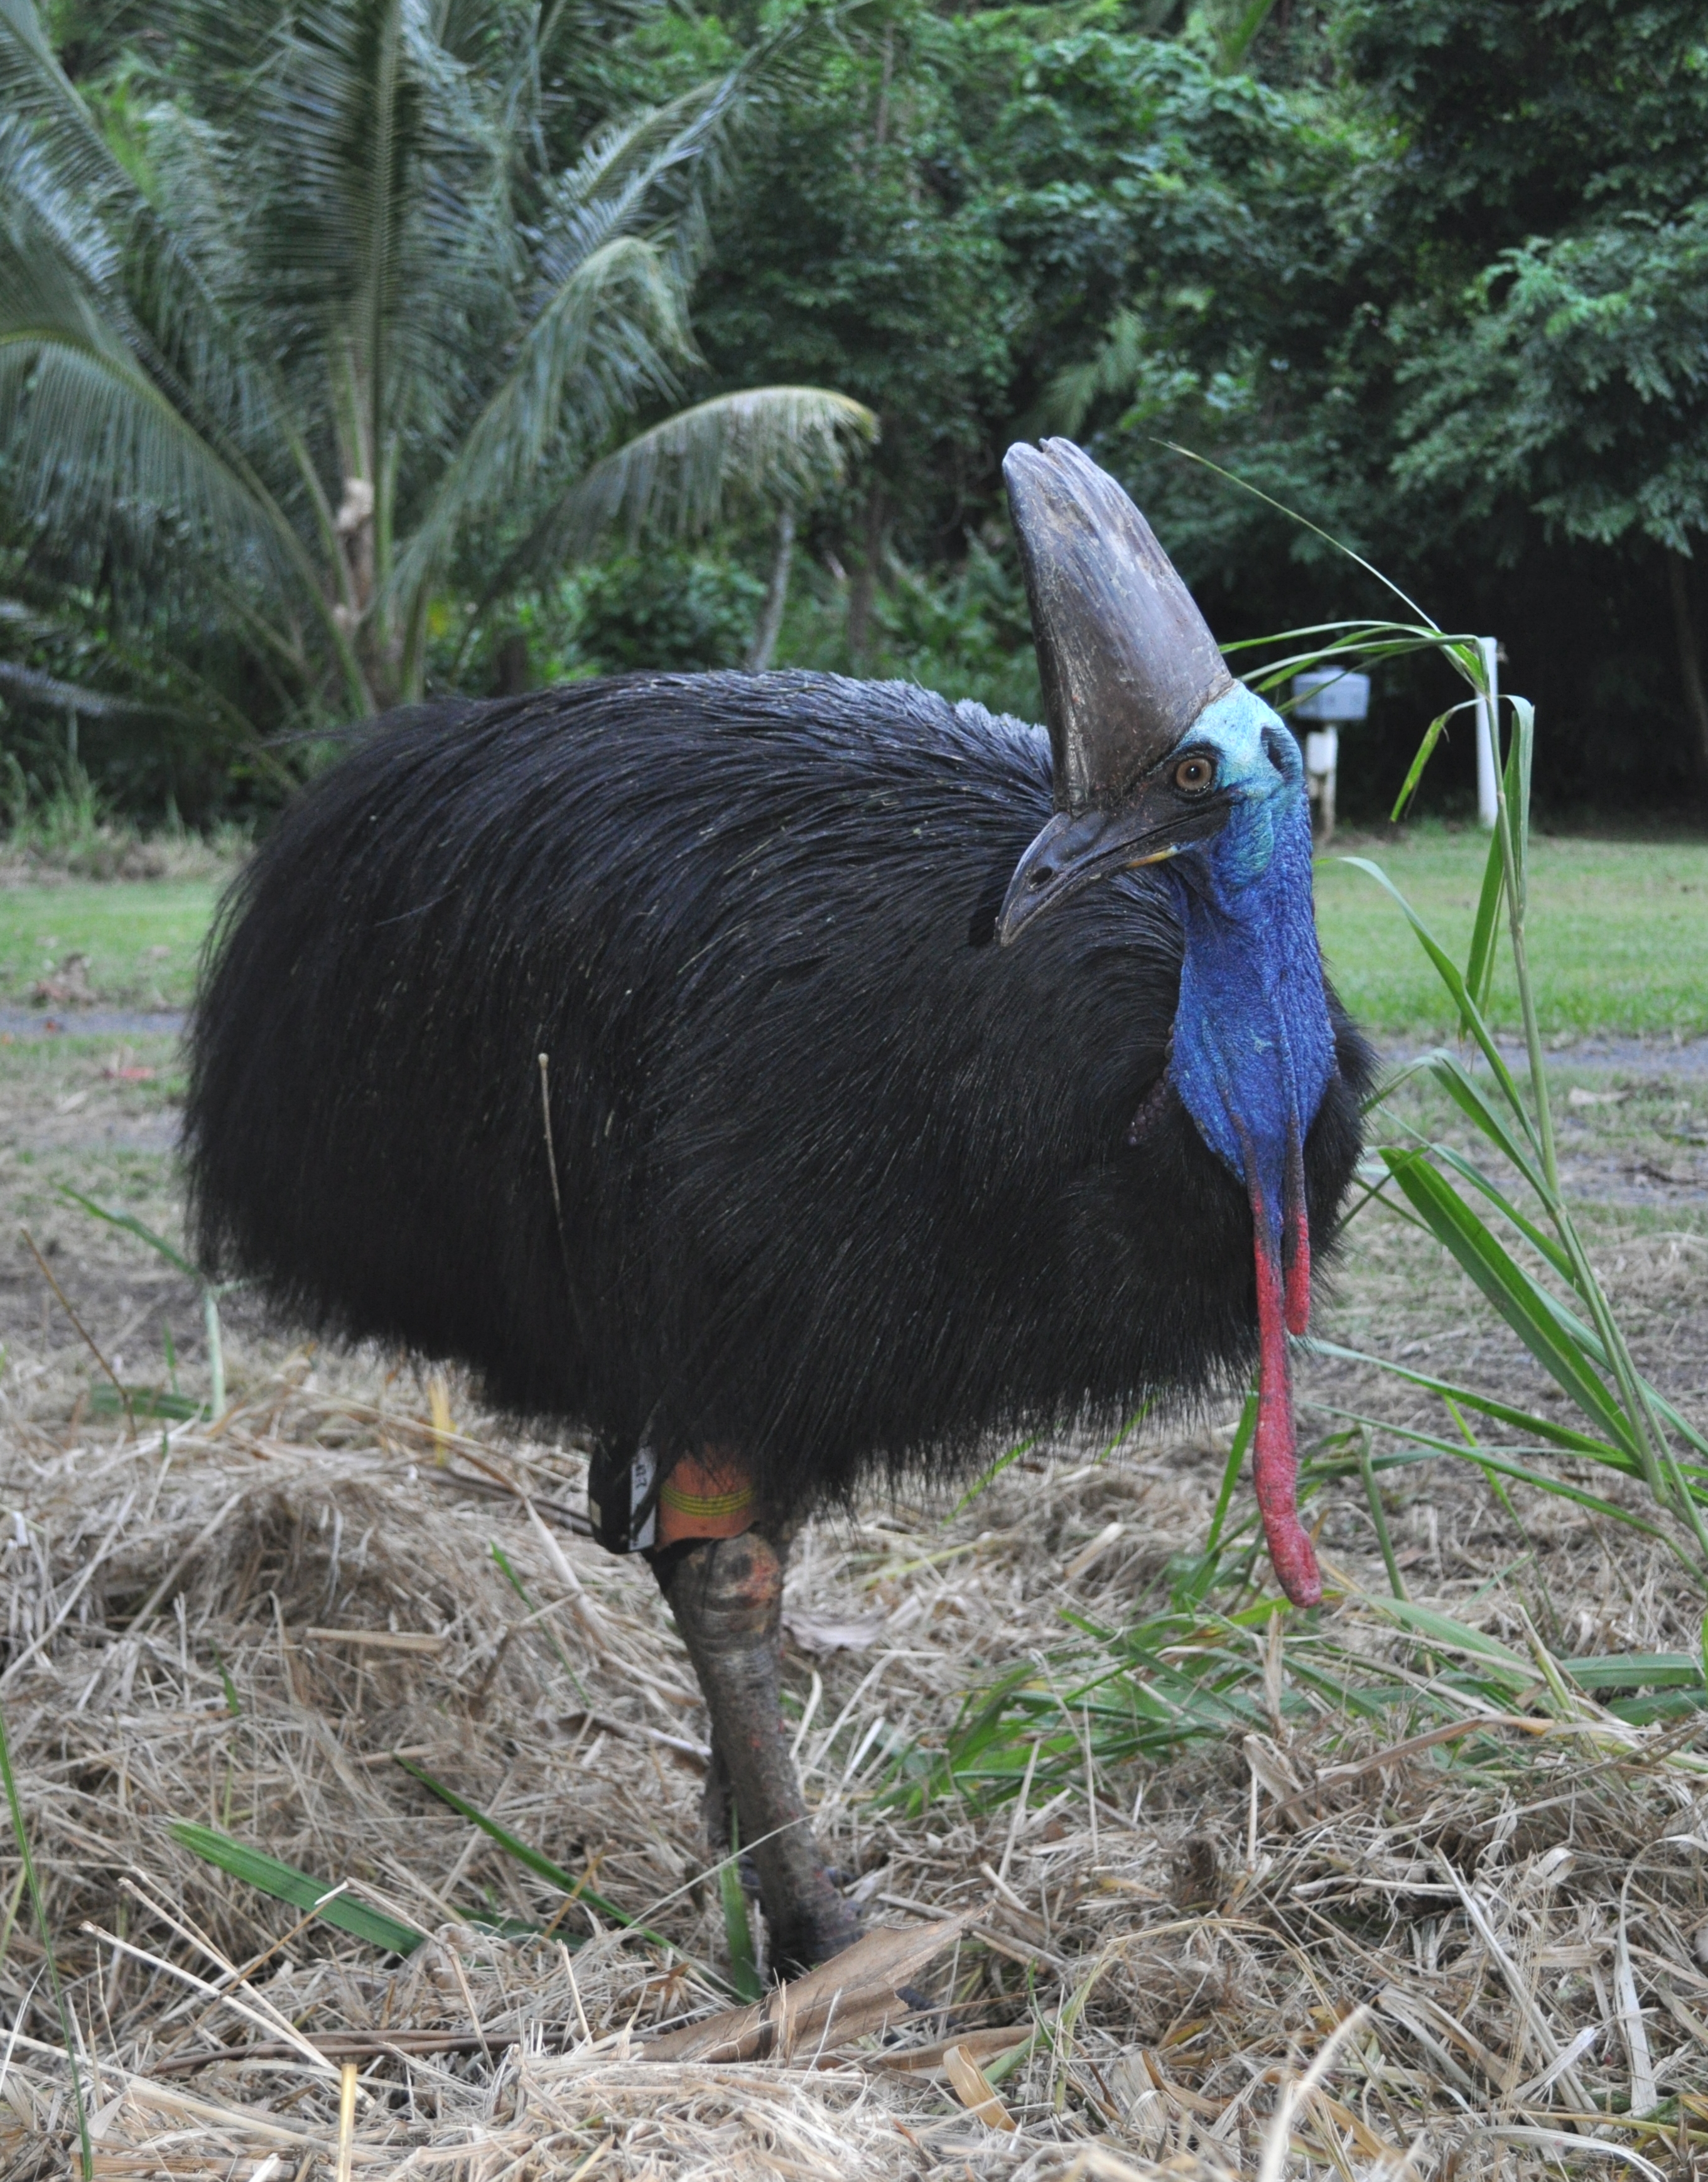 A Cassowary wearing a tracking device - neatly attached to its leg. Photo credit: H. Campbell